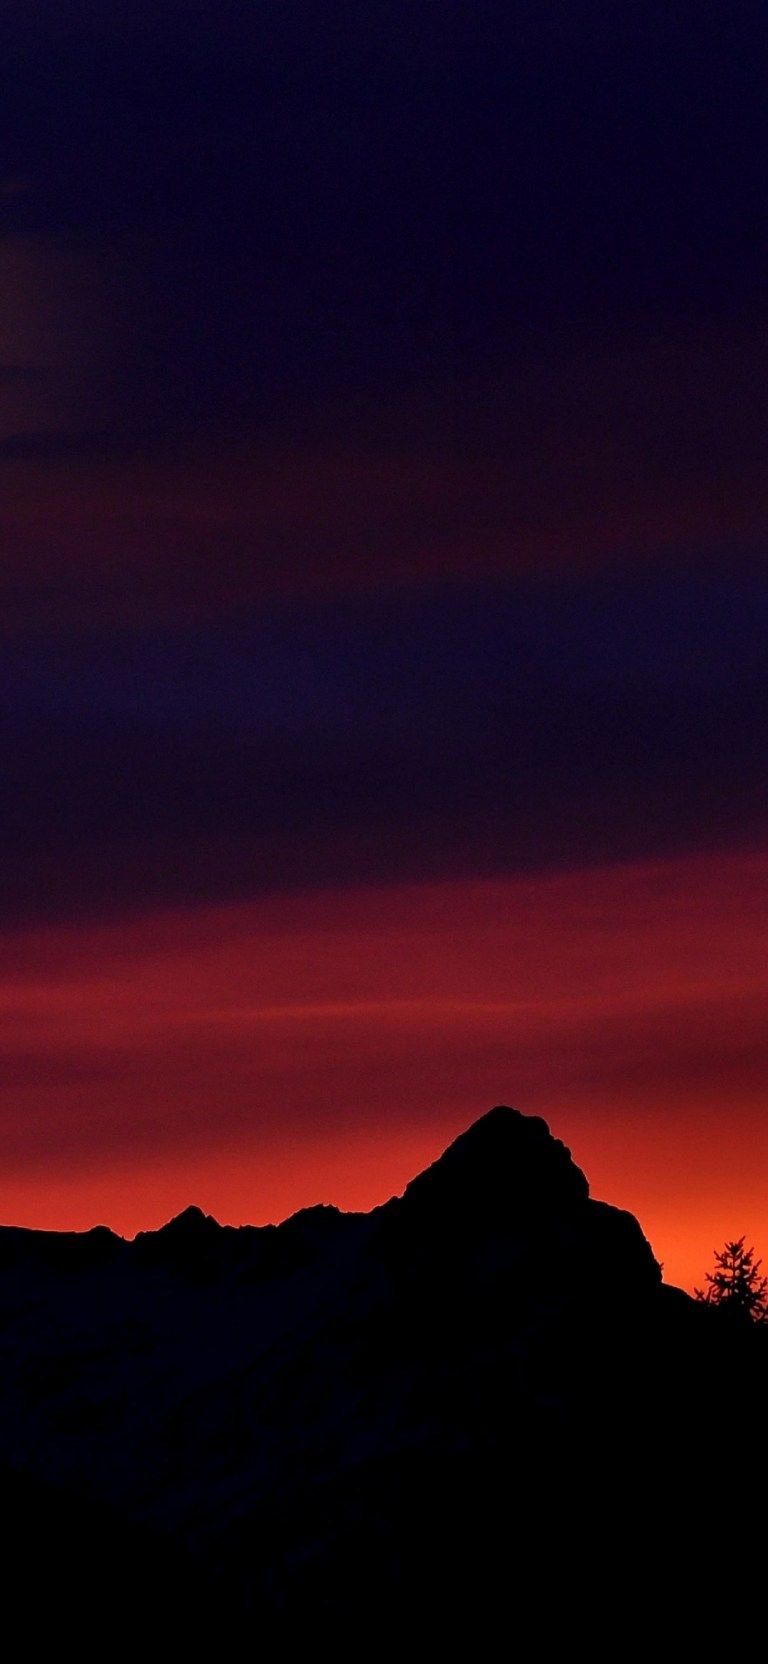 Afterglow Black and Red Amoled Sunset Wallpaper Android ⋆ Traxzee